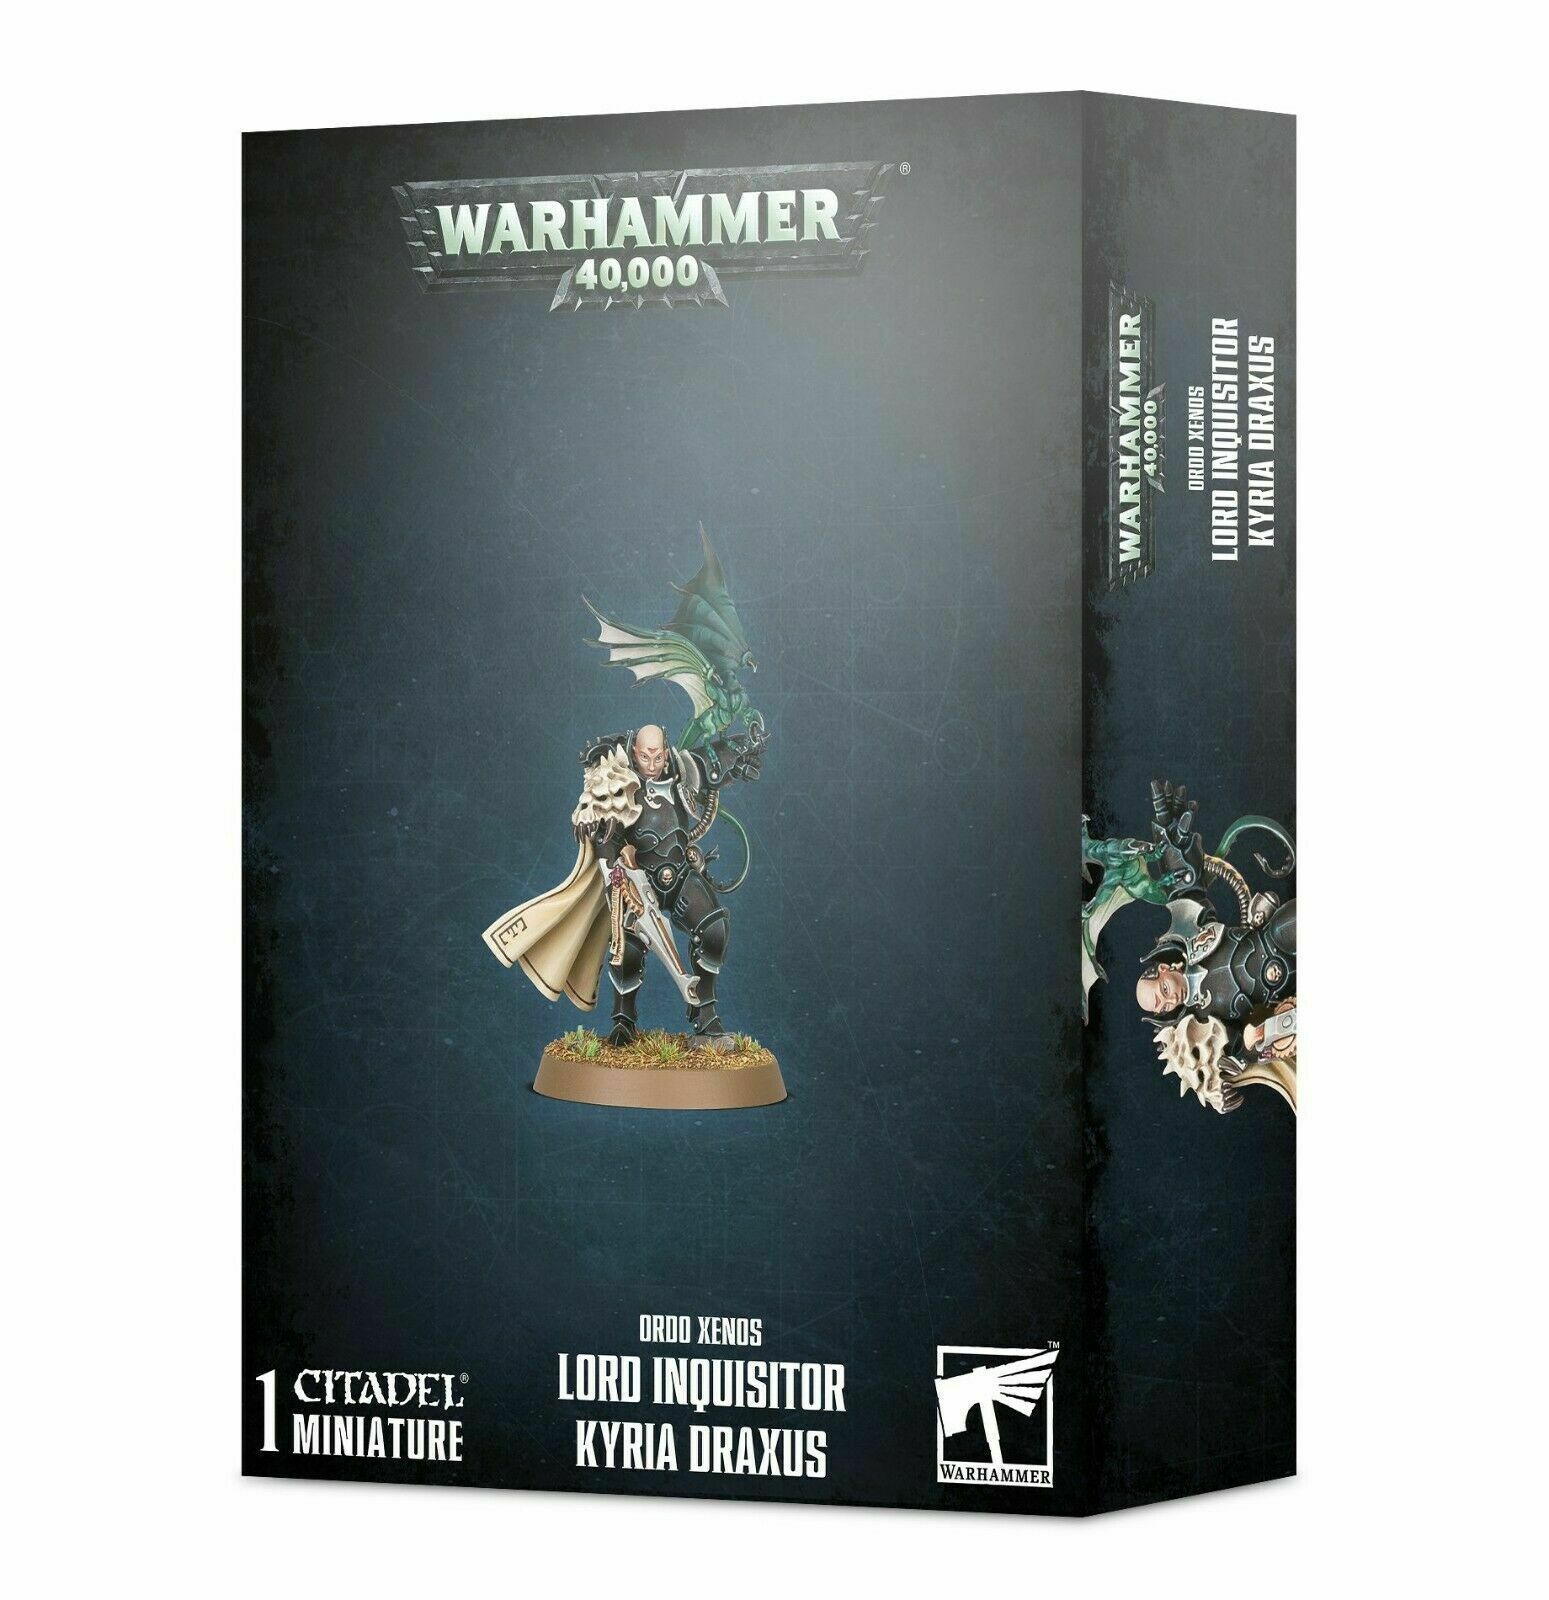 Discount Ordo Xenos Lord Inquisitor Kyria Draxus - West Coast Games